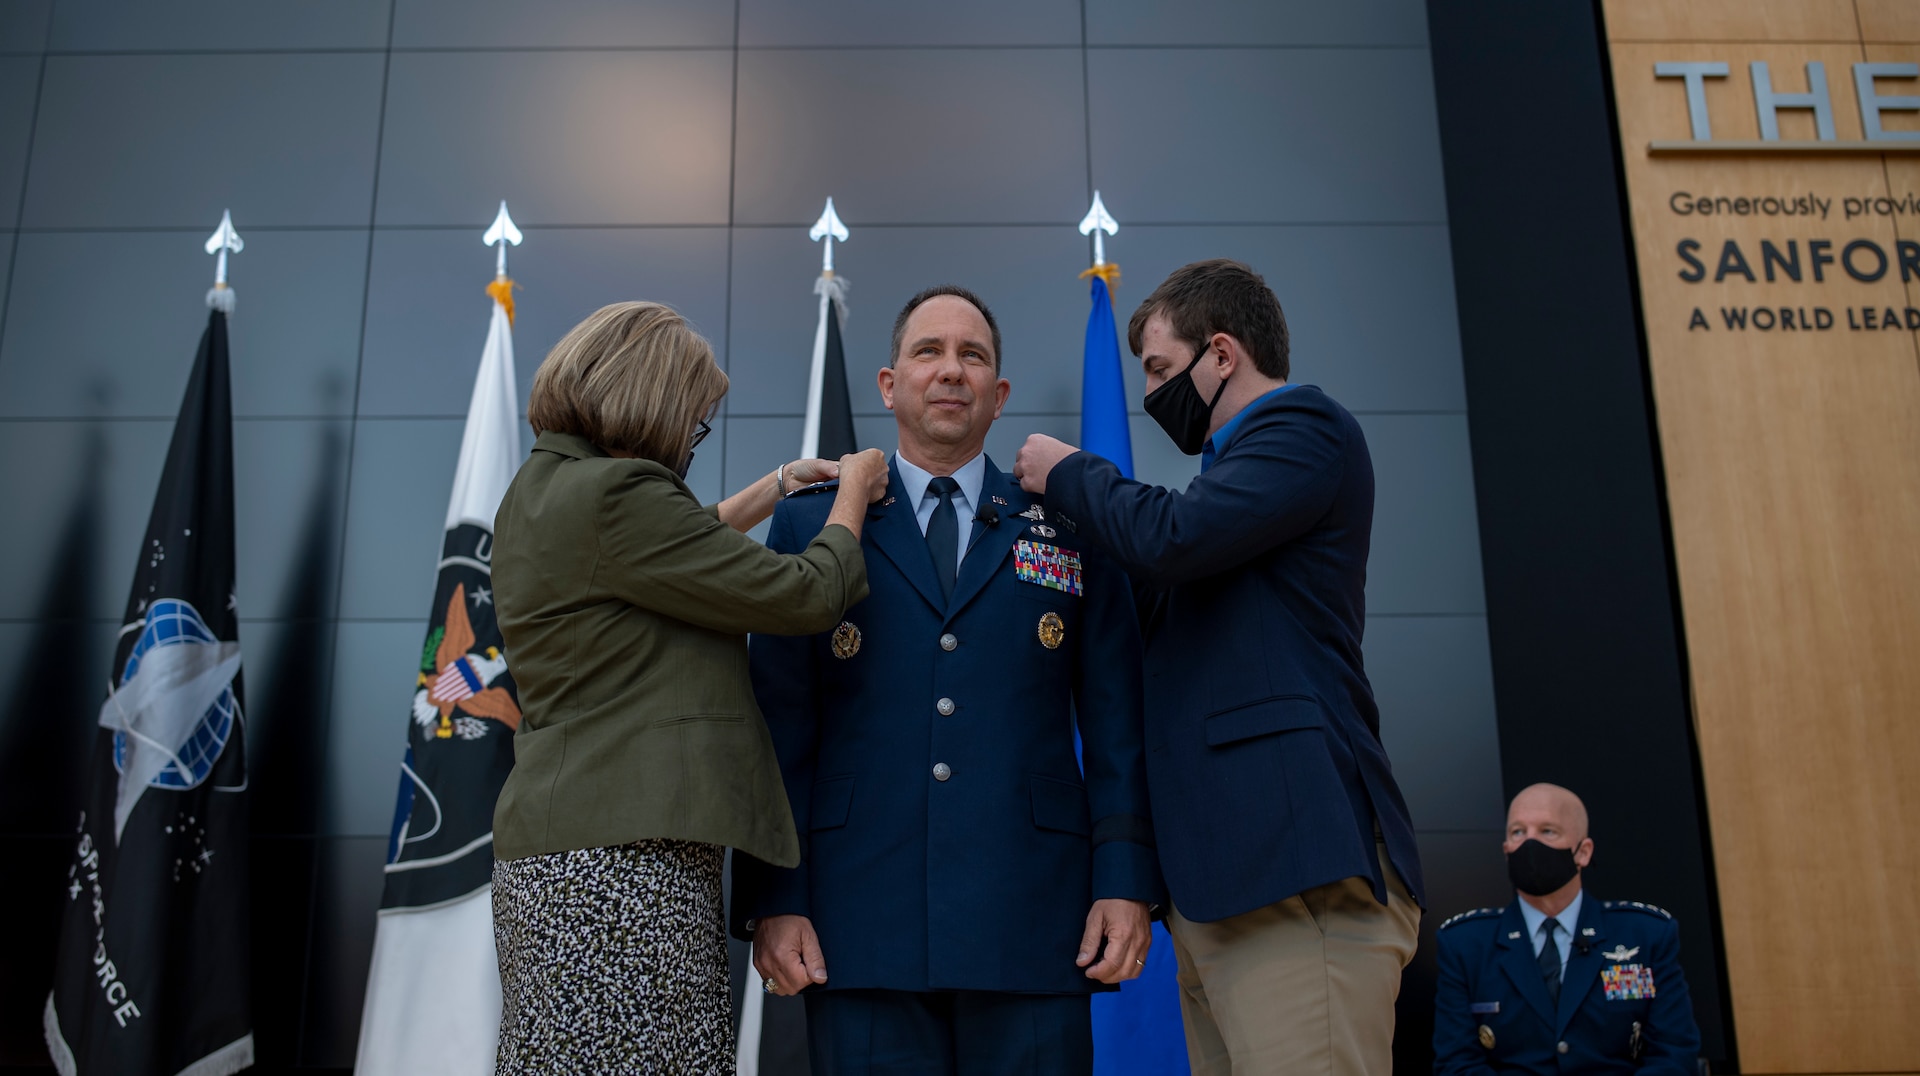 Tonia Shaw (left) and her son, Timothy Shaw (right), pin newly promoted U.S. Space Force Lt. Gen. John Shaw during the general's promotion and transfer ceremony Nov. 23, 2020, at the U.S. Air Force Academy in Colorado Springs, Colo.